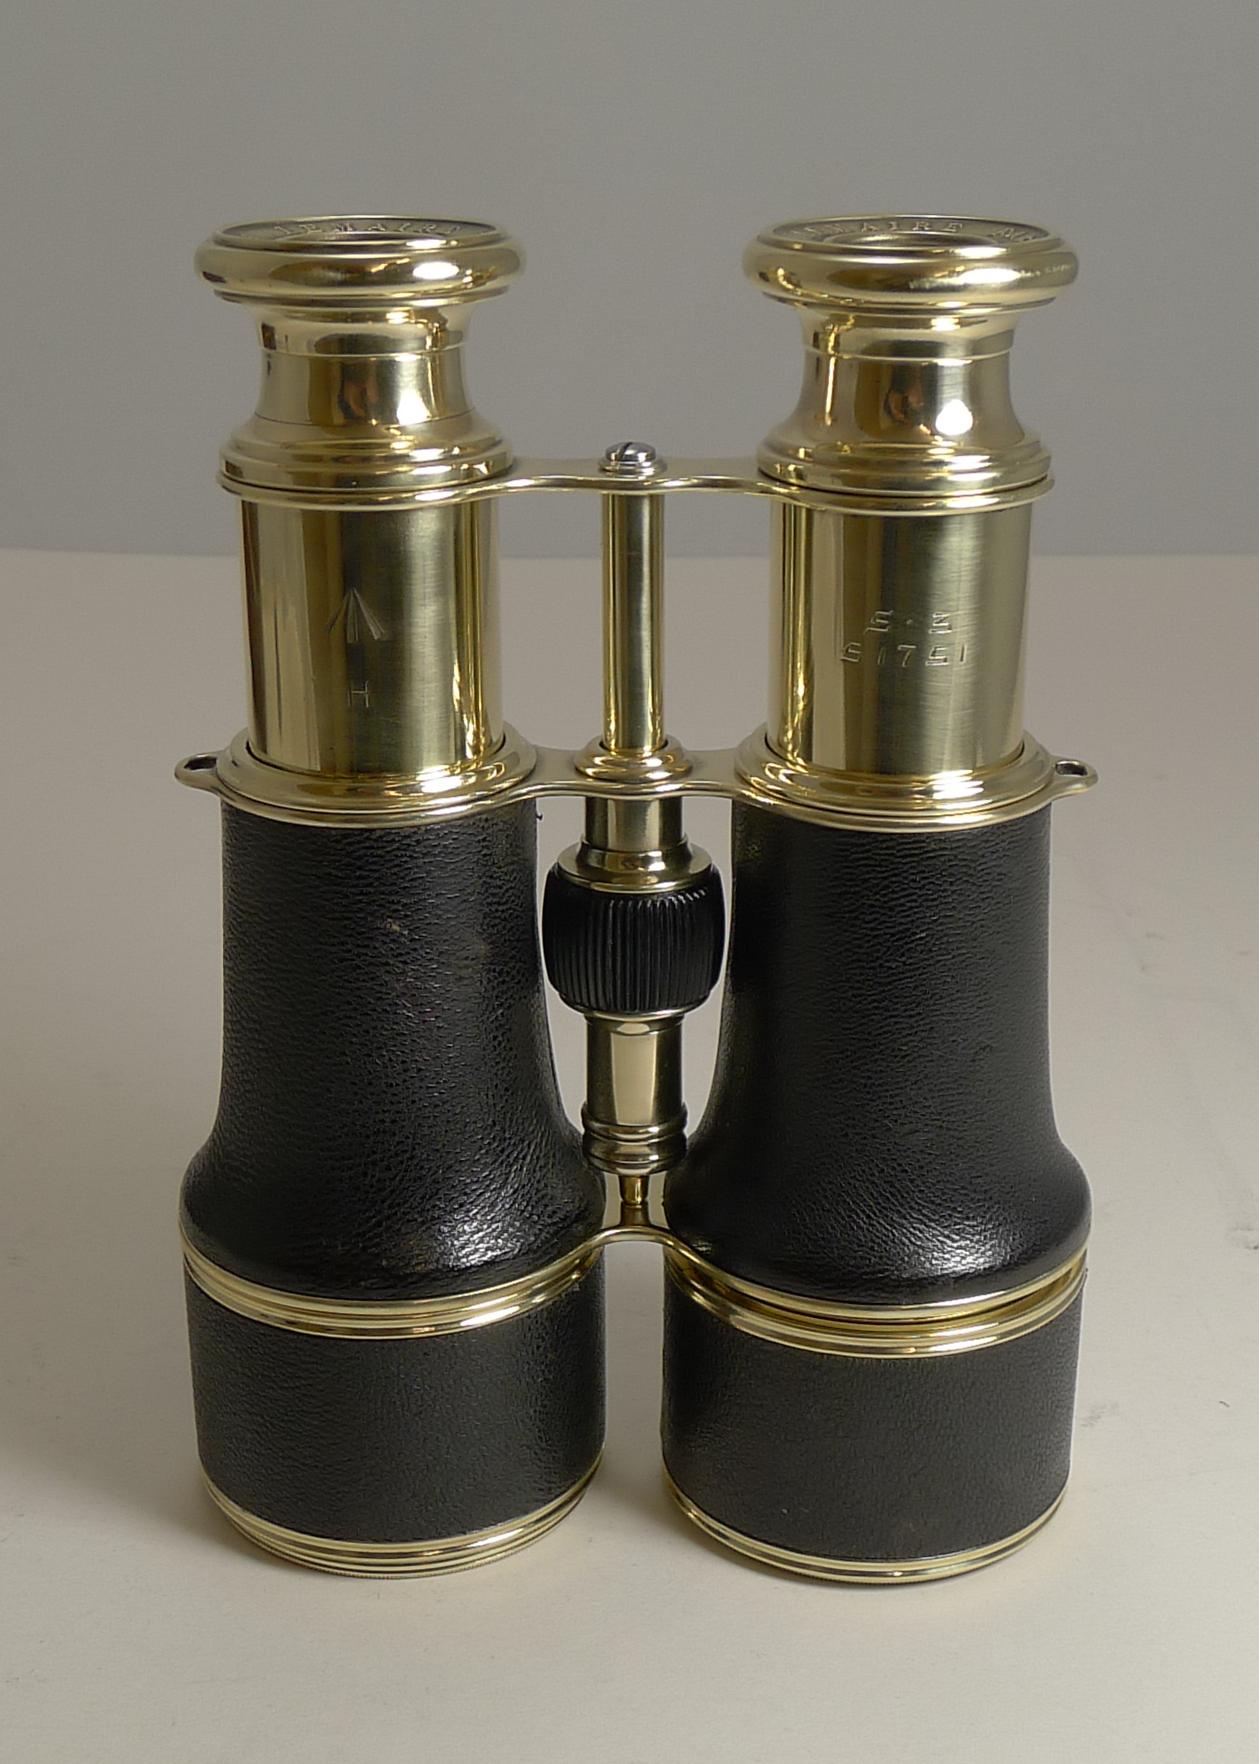 Pair of WWI Binoculars and Case, British Officer's Issue, 1916, LeMaire, Paris 2